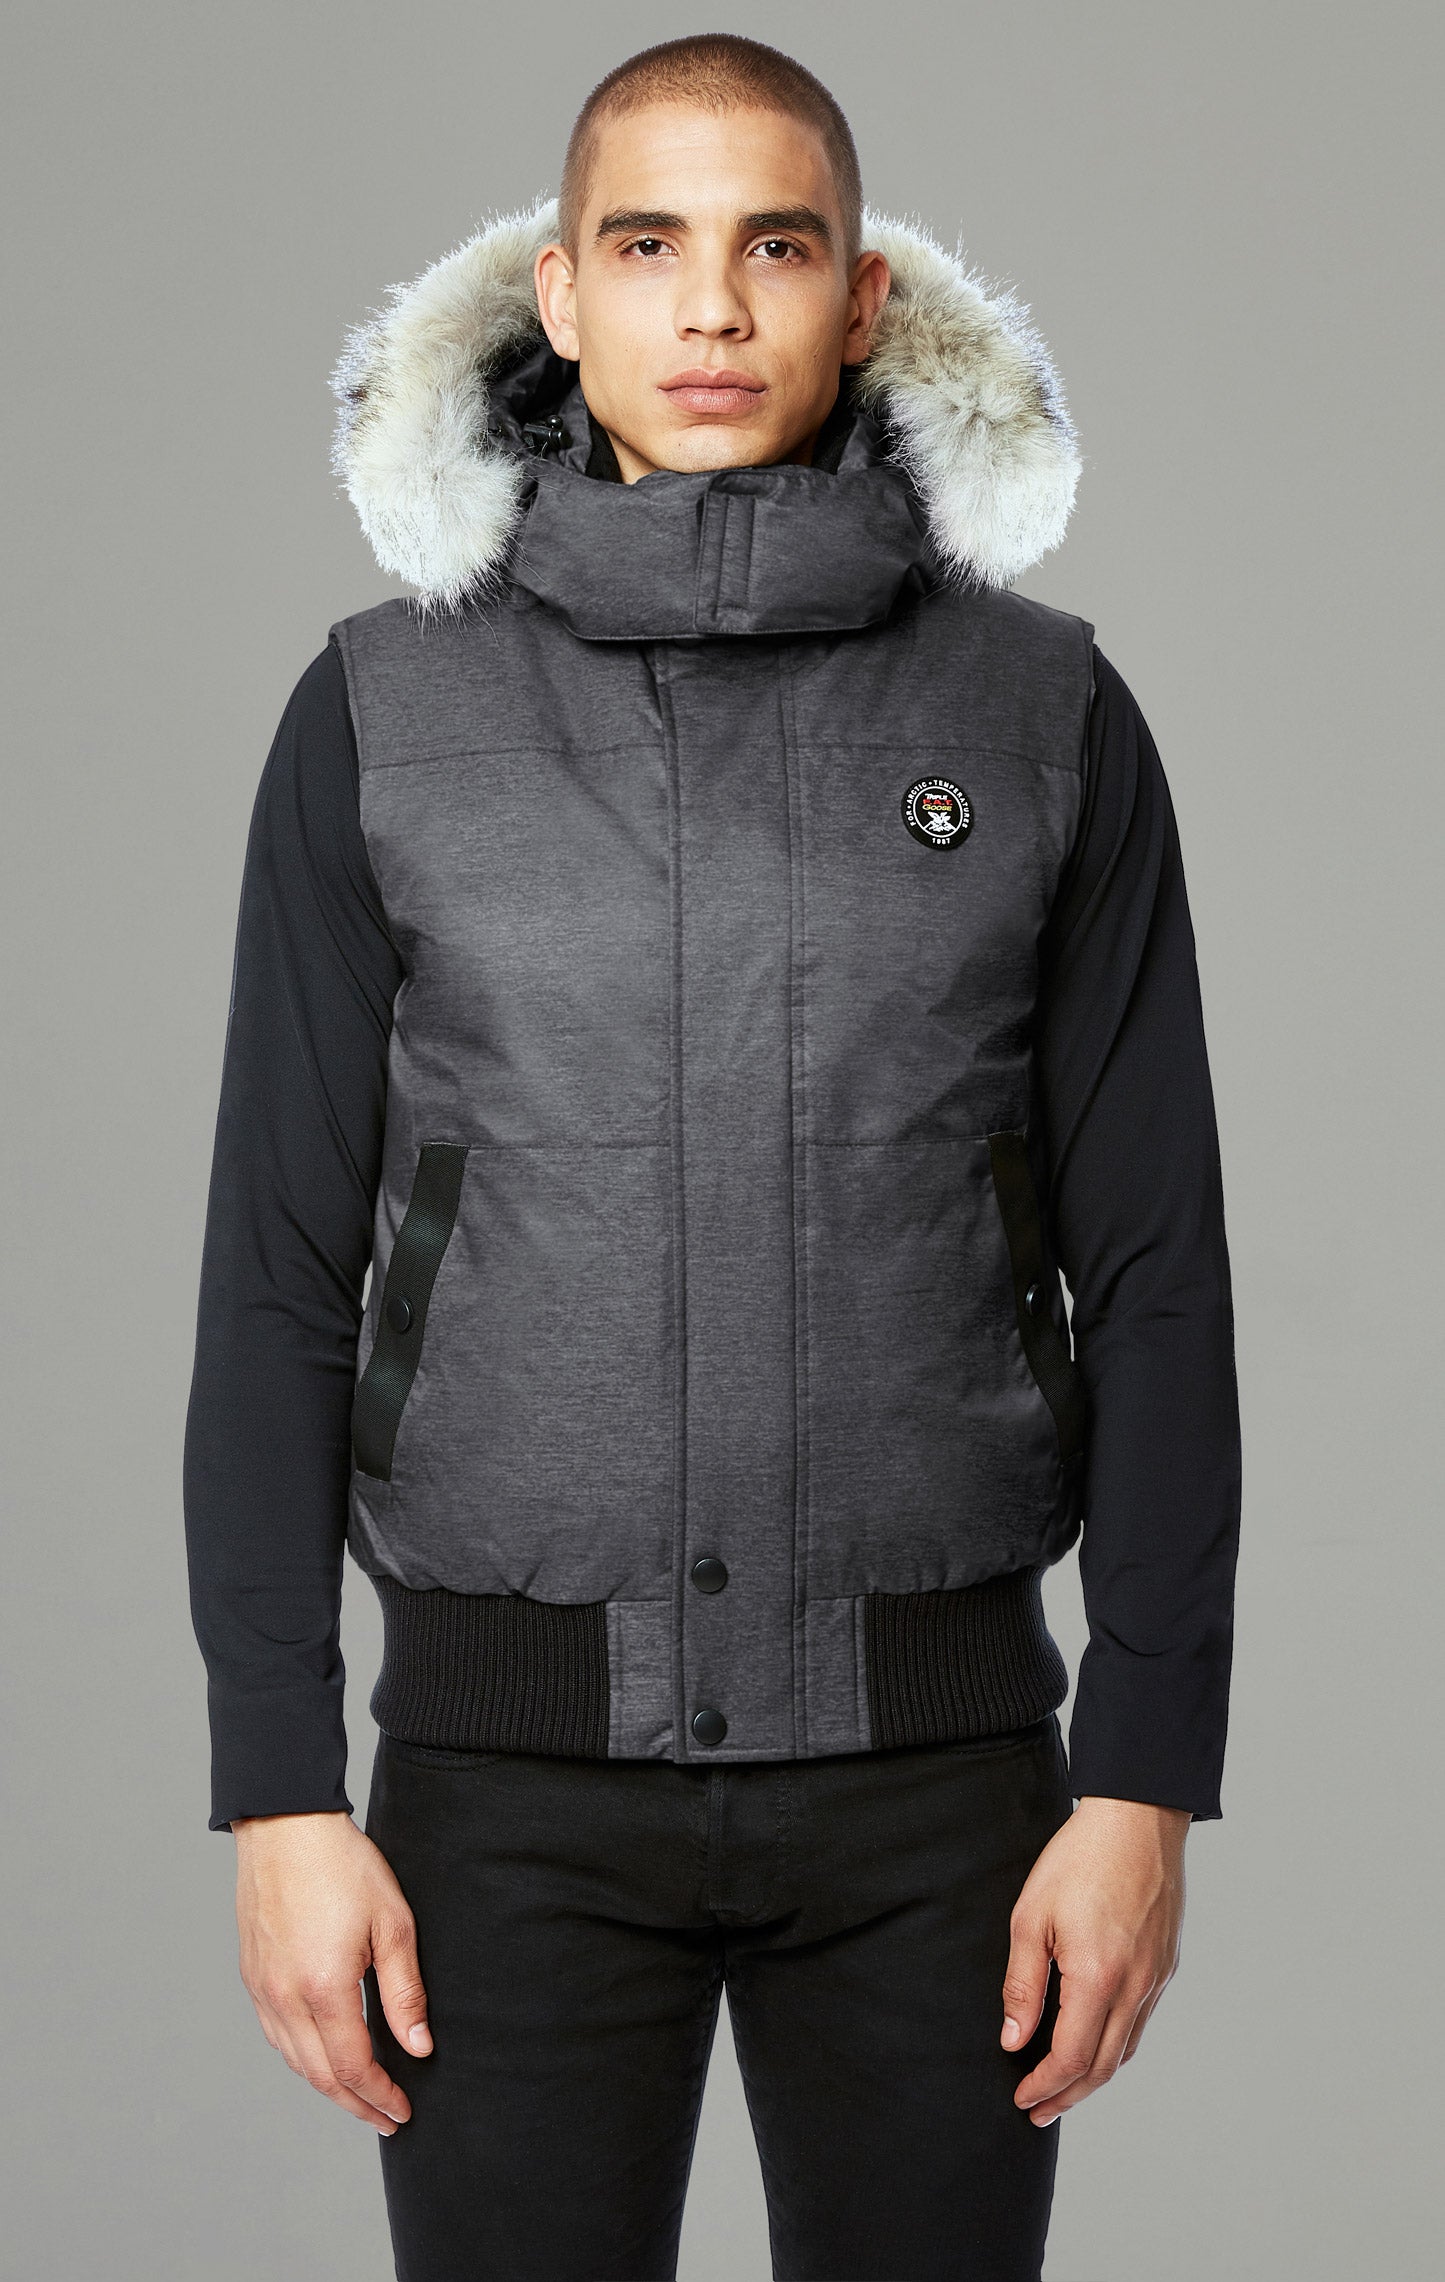 Men's Puffer Jackets and Vests